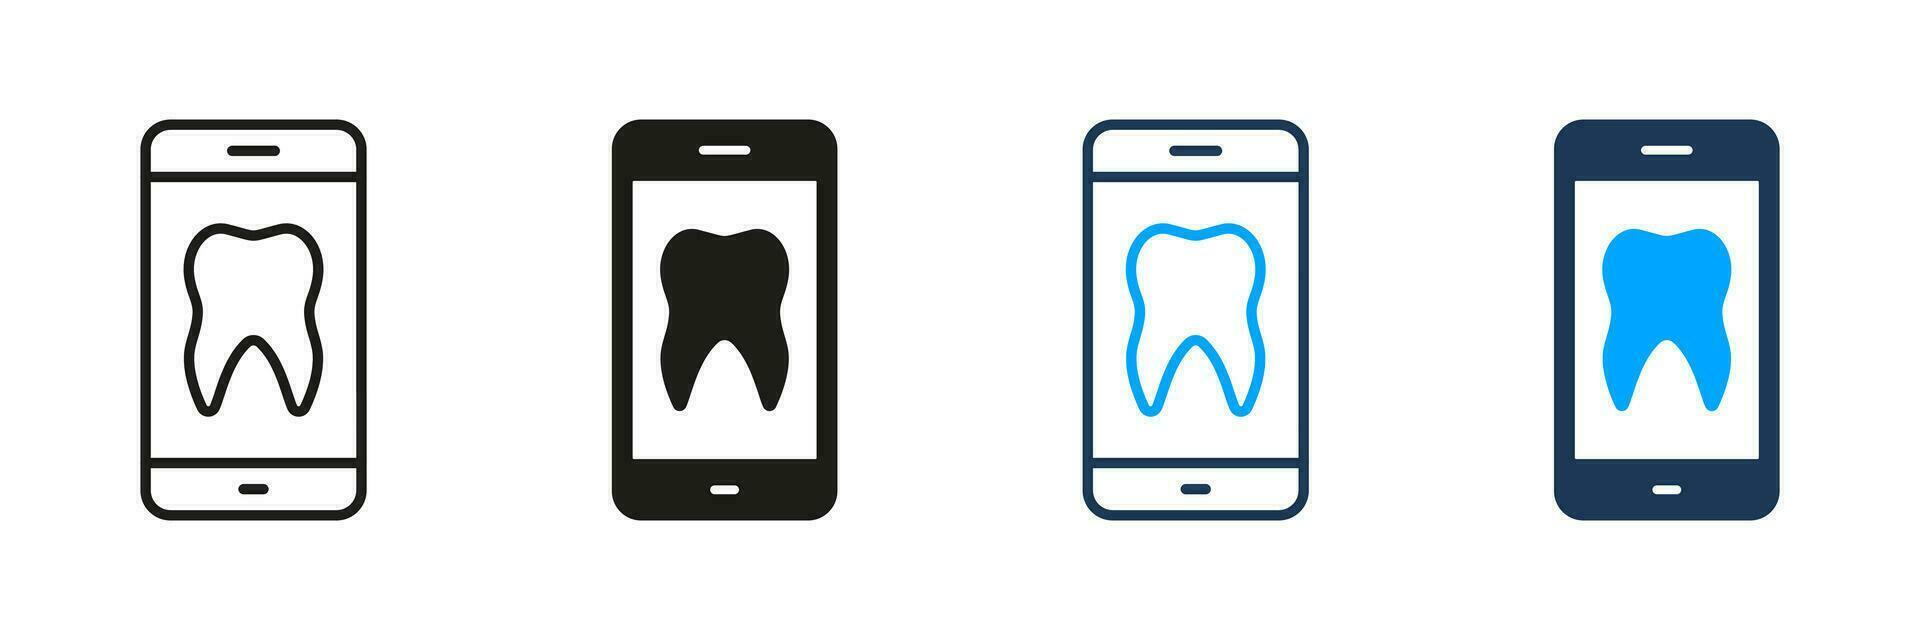 Online Dentist Help in Smartphone Silhouette and Line Icon Set. Remote Tooth Health Diagnosis, Dental Care Black and Color Pictogram. Dentistry Medicine in Mobile Phone. Isolated Vector Illustration.